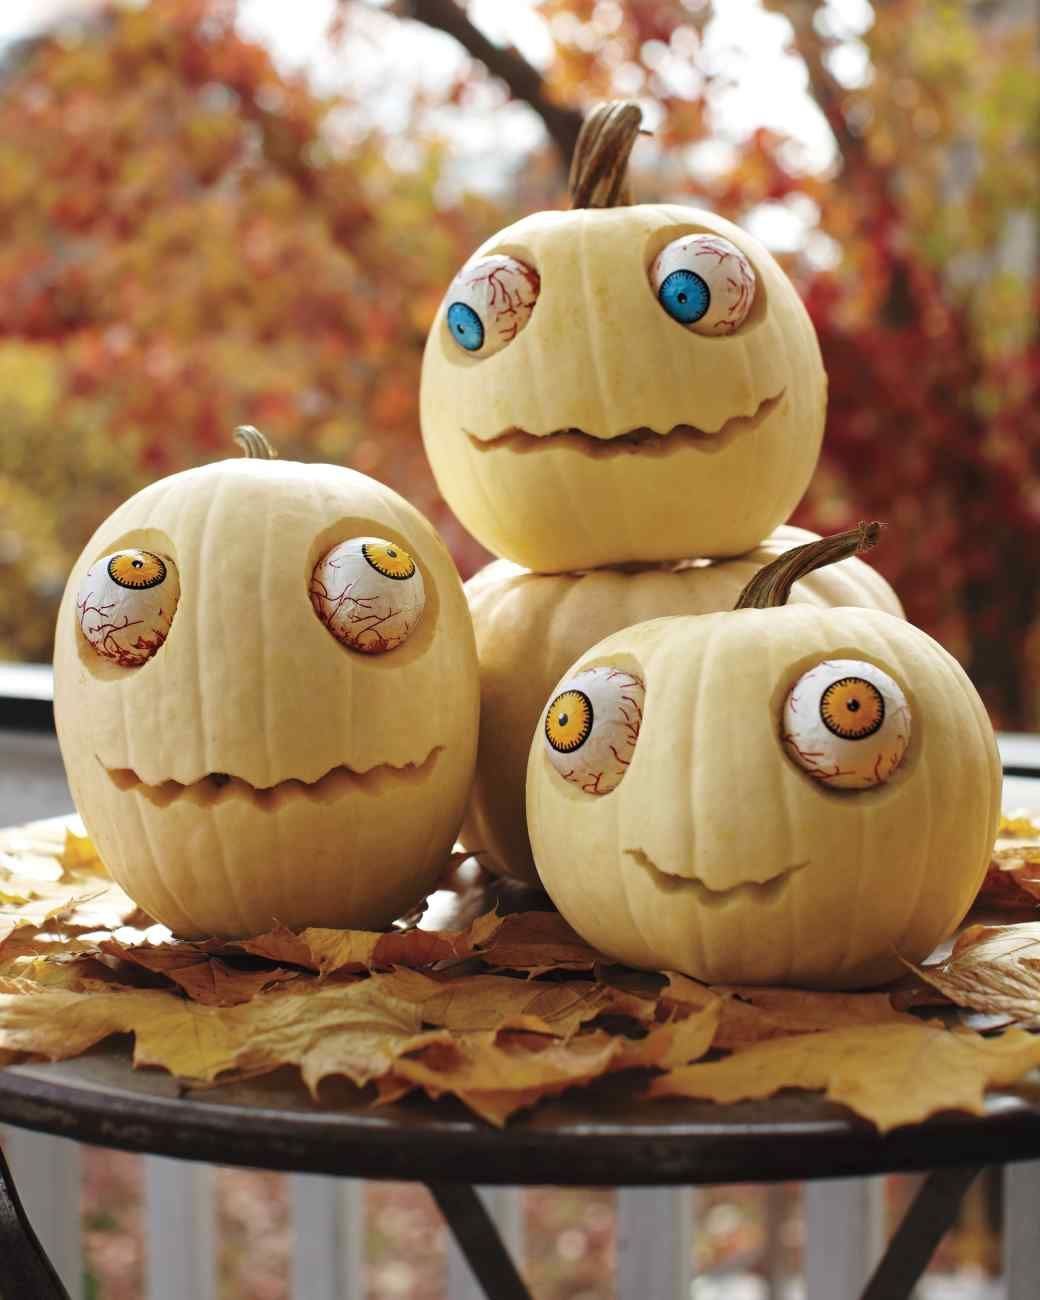 Give Your Pumpkin Monster Eyes